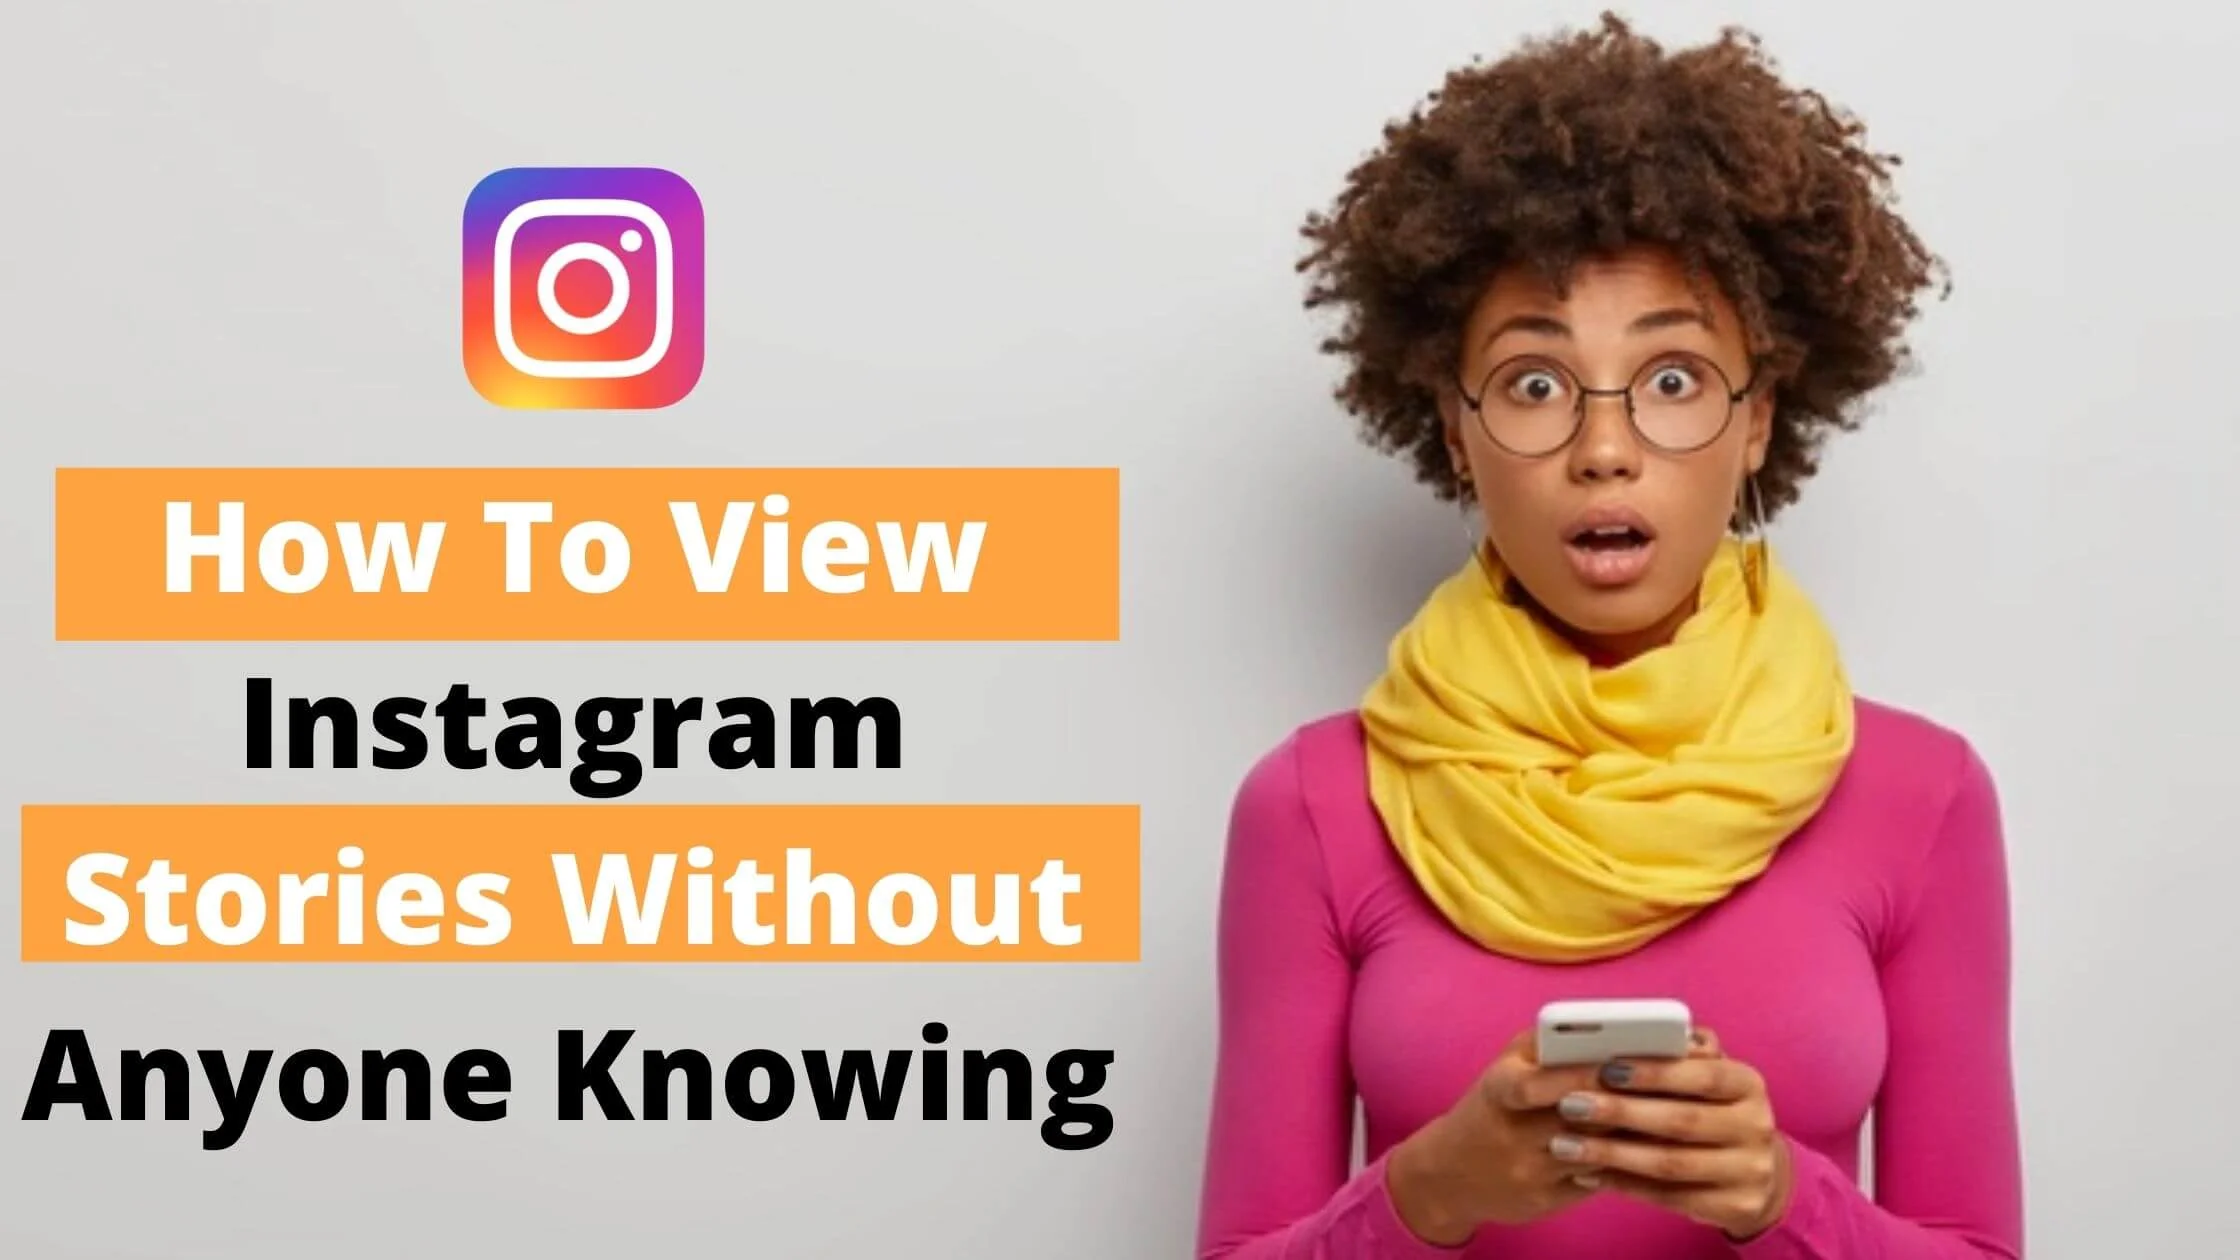 How To View Instagram Stories Without Anyone Knowing